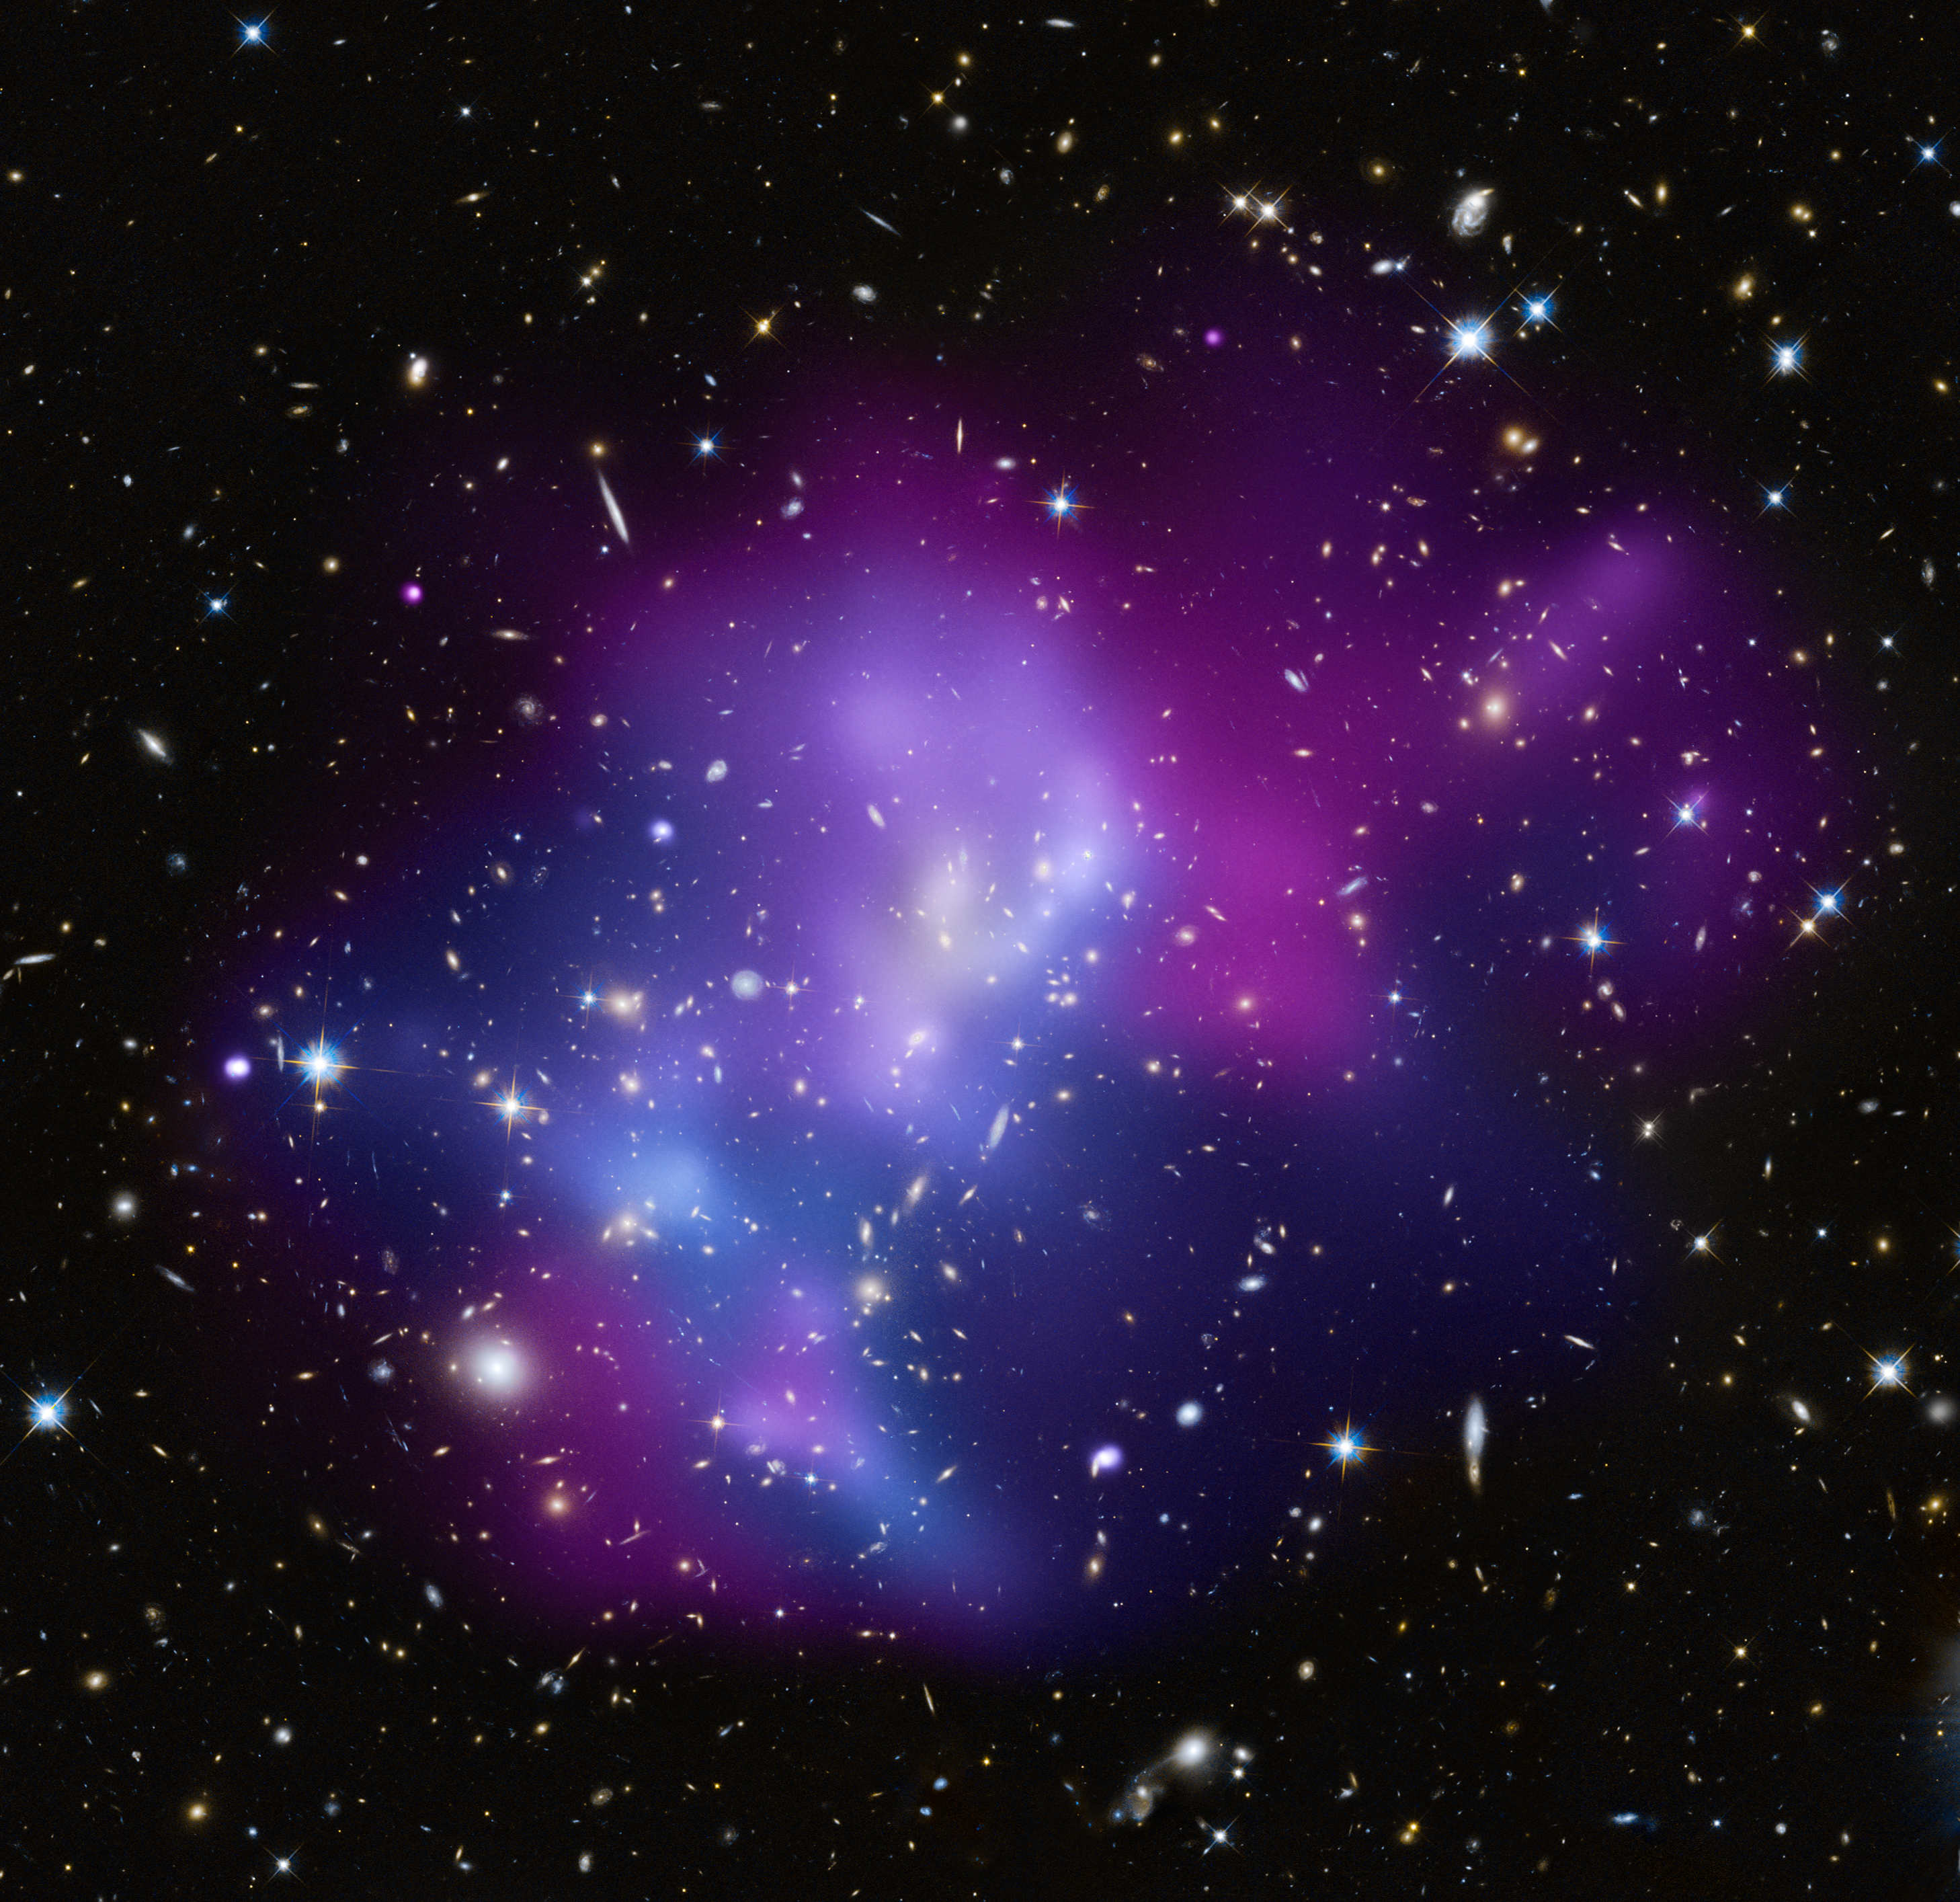 Cosmic Heavyweights in Free-For-All- One of the most complex galaxy clusters, located about 5.4 billion light years from Earth.